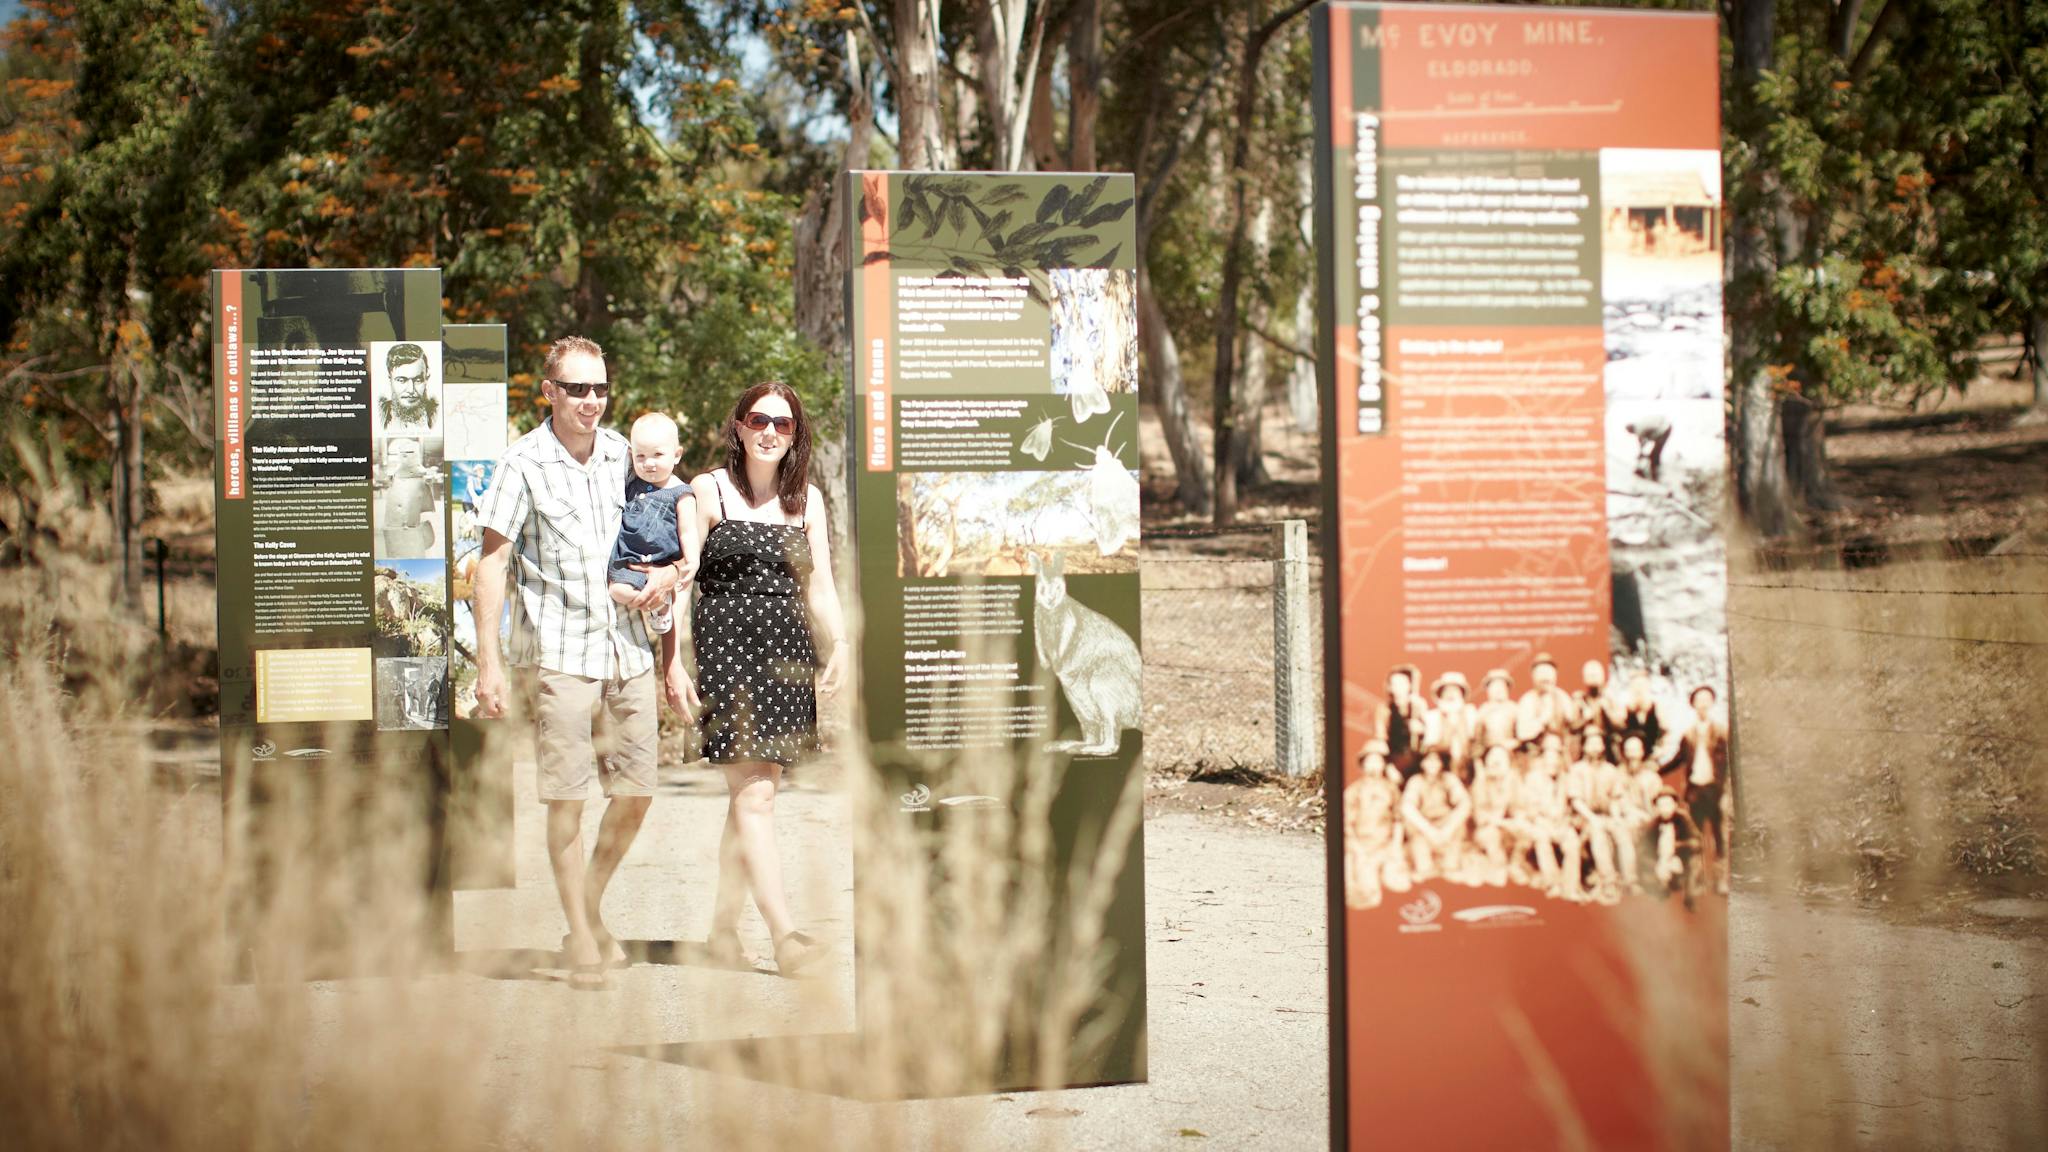 Family walking along path in the sun, looking at interpretive signage